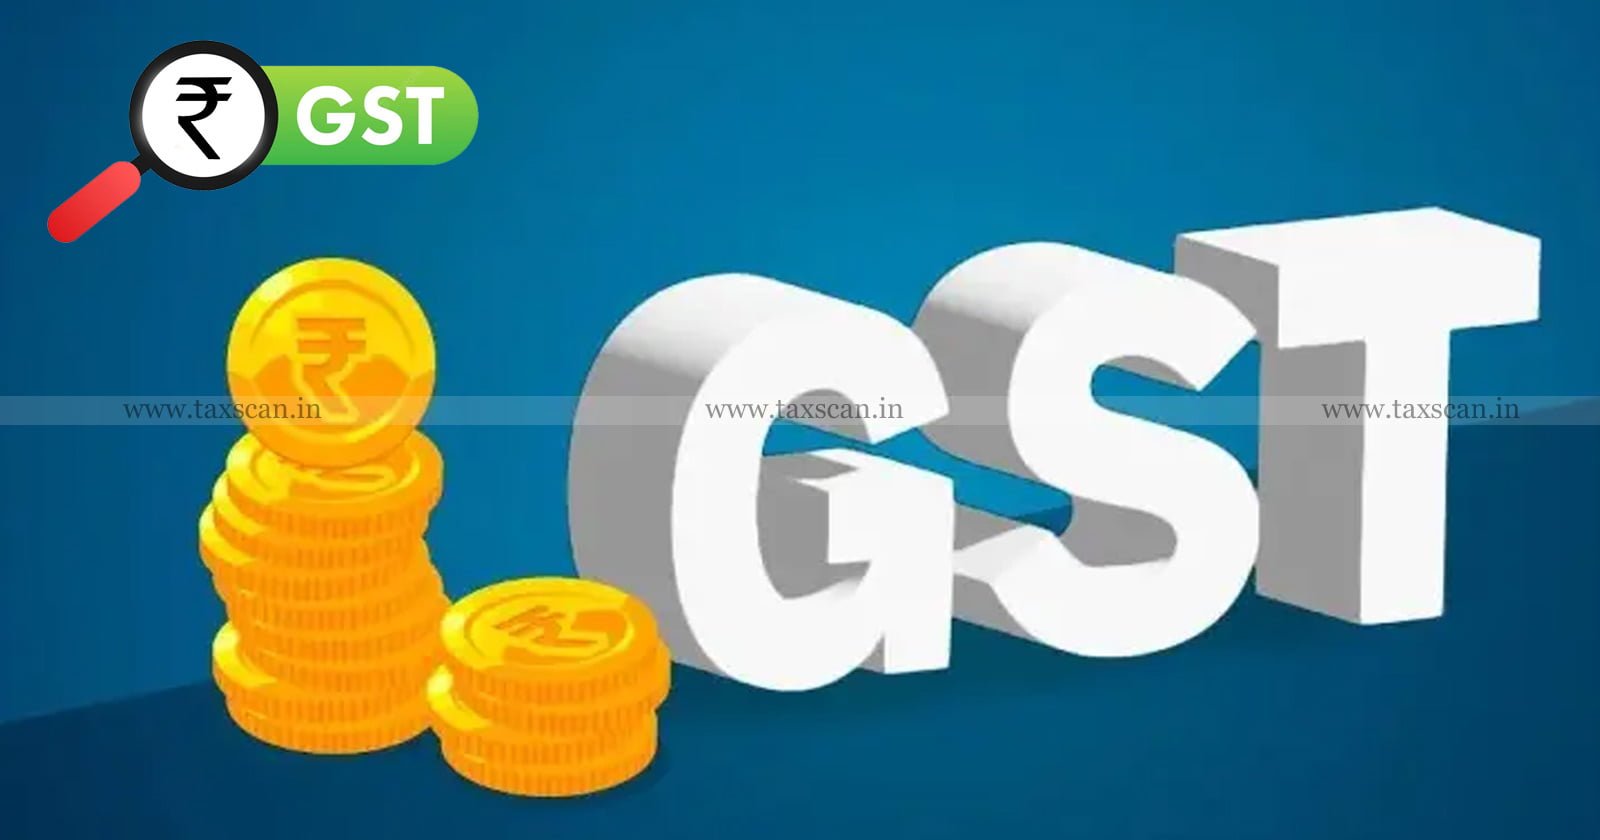 Residential Dwelling - Commercial Purpose on FCM Basis - Authority for Advance Ruling - Pay GST on Residential Dwelling - GST on Residential Dwelling - gst